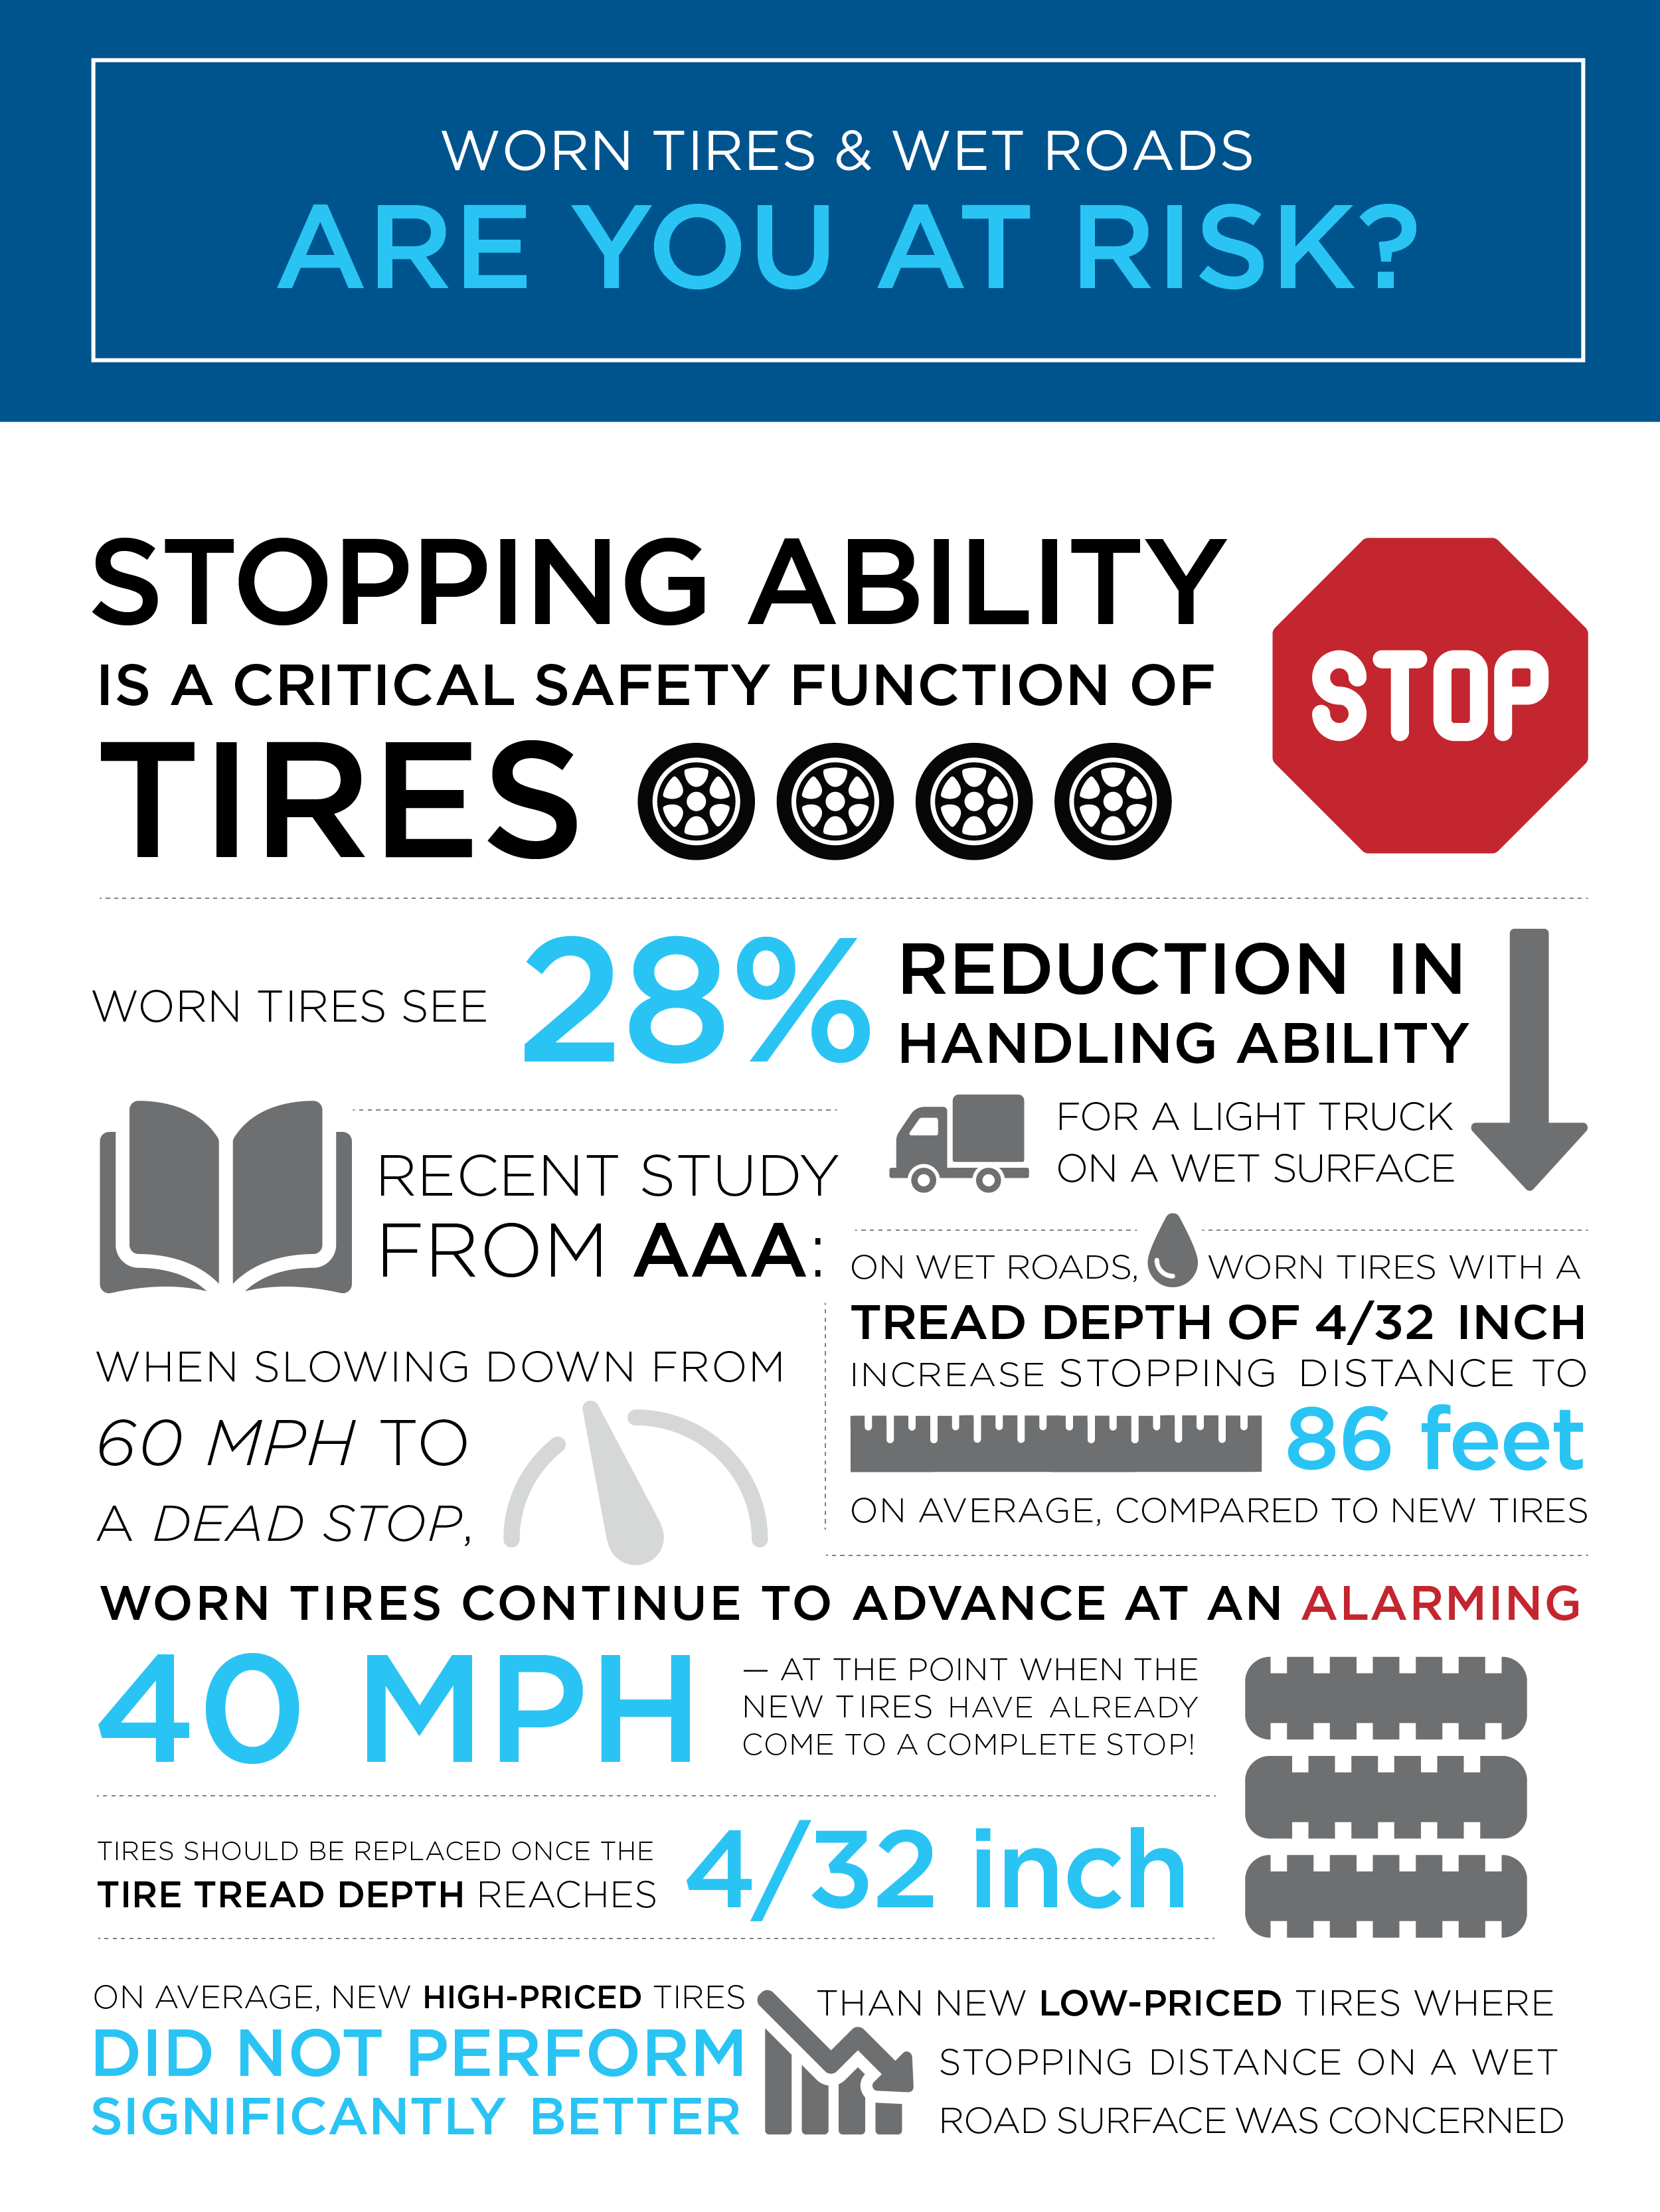 Worn tires and wet roads infographic.